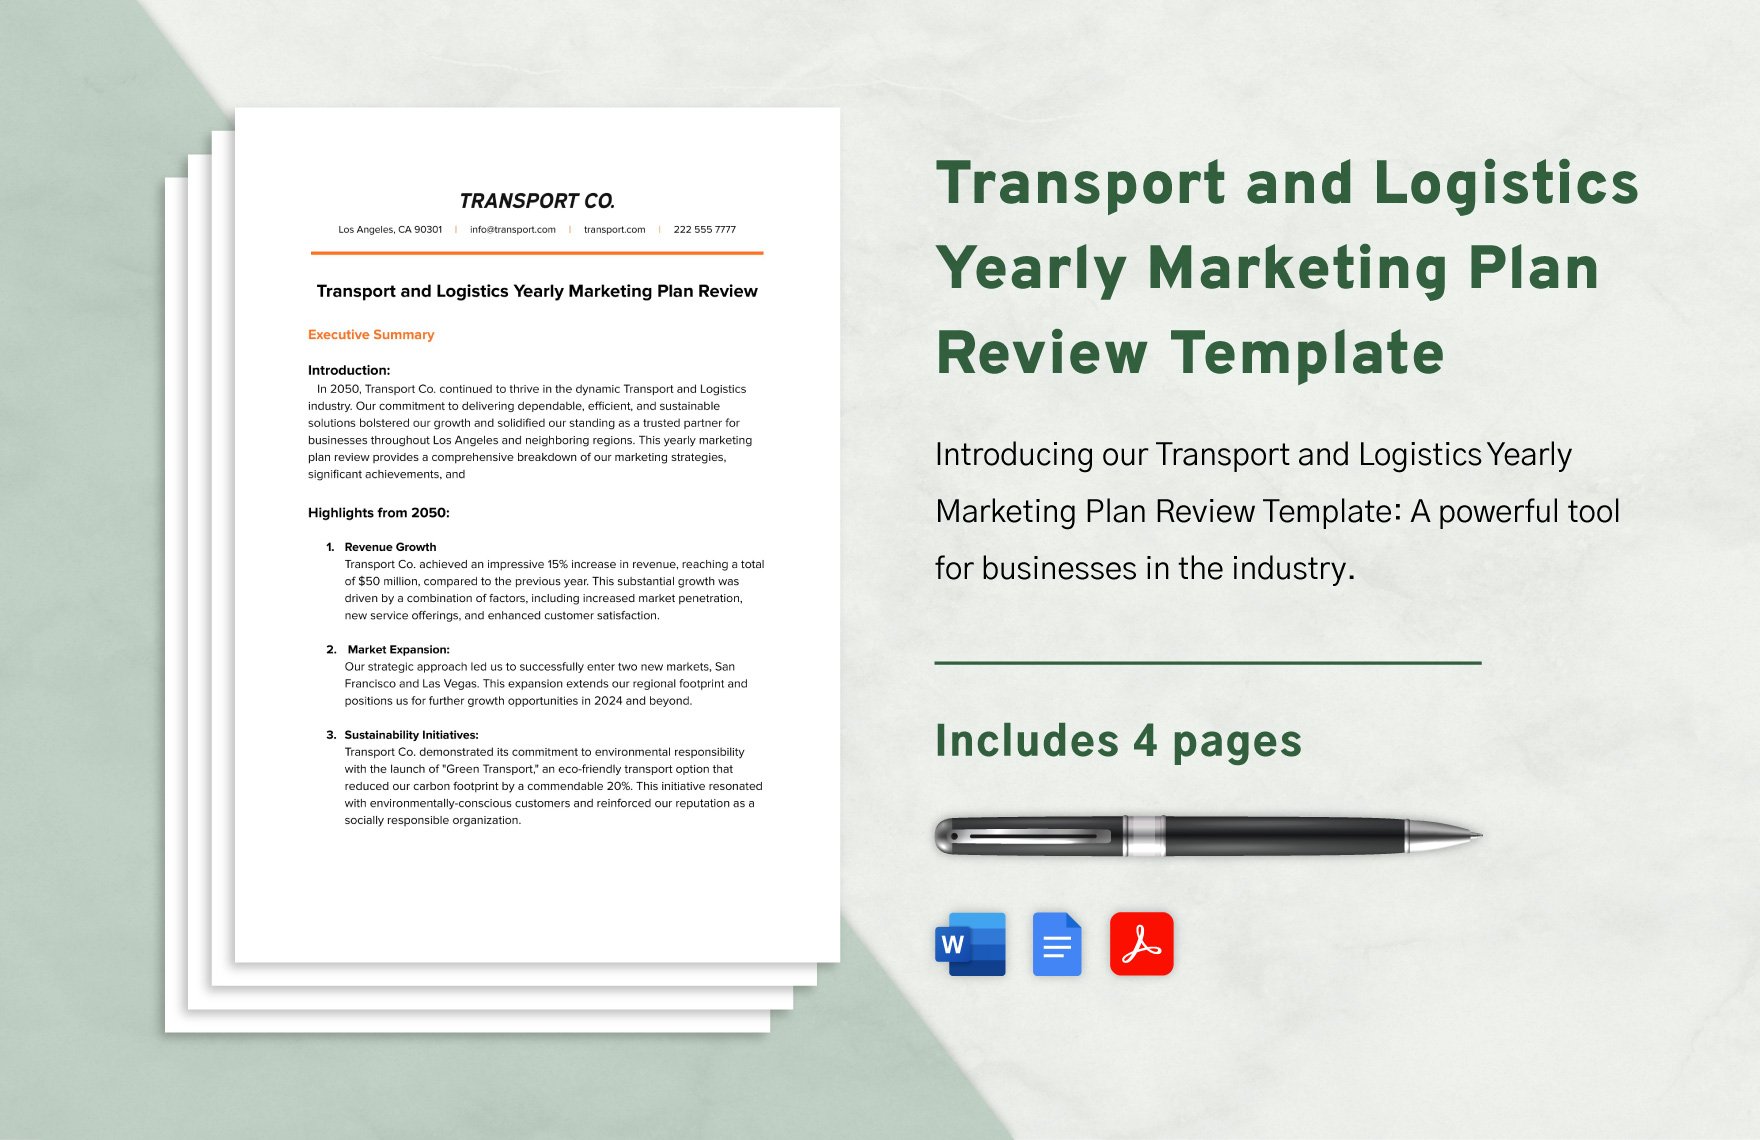 Transport and Logistics Yearly Marketing Plan Review Template